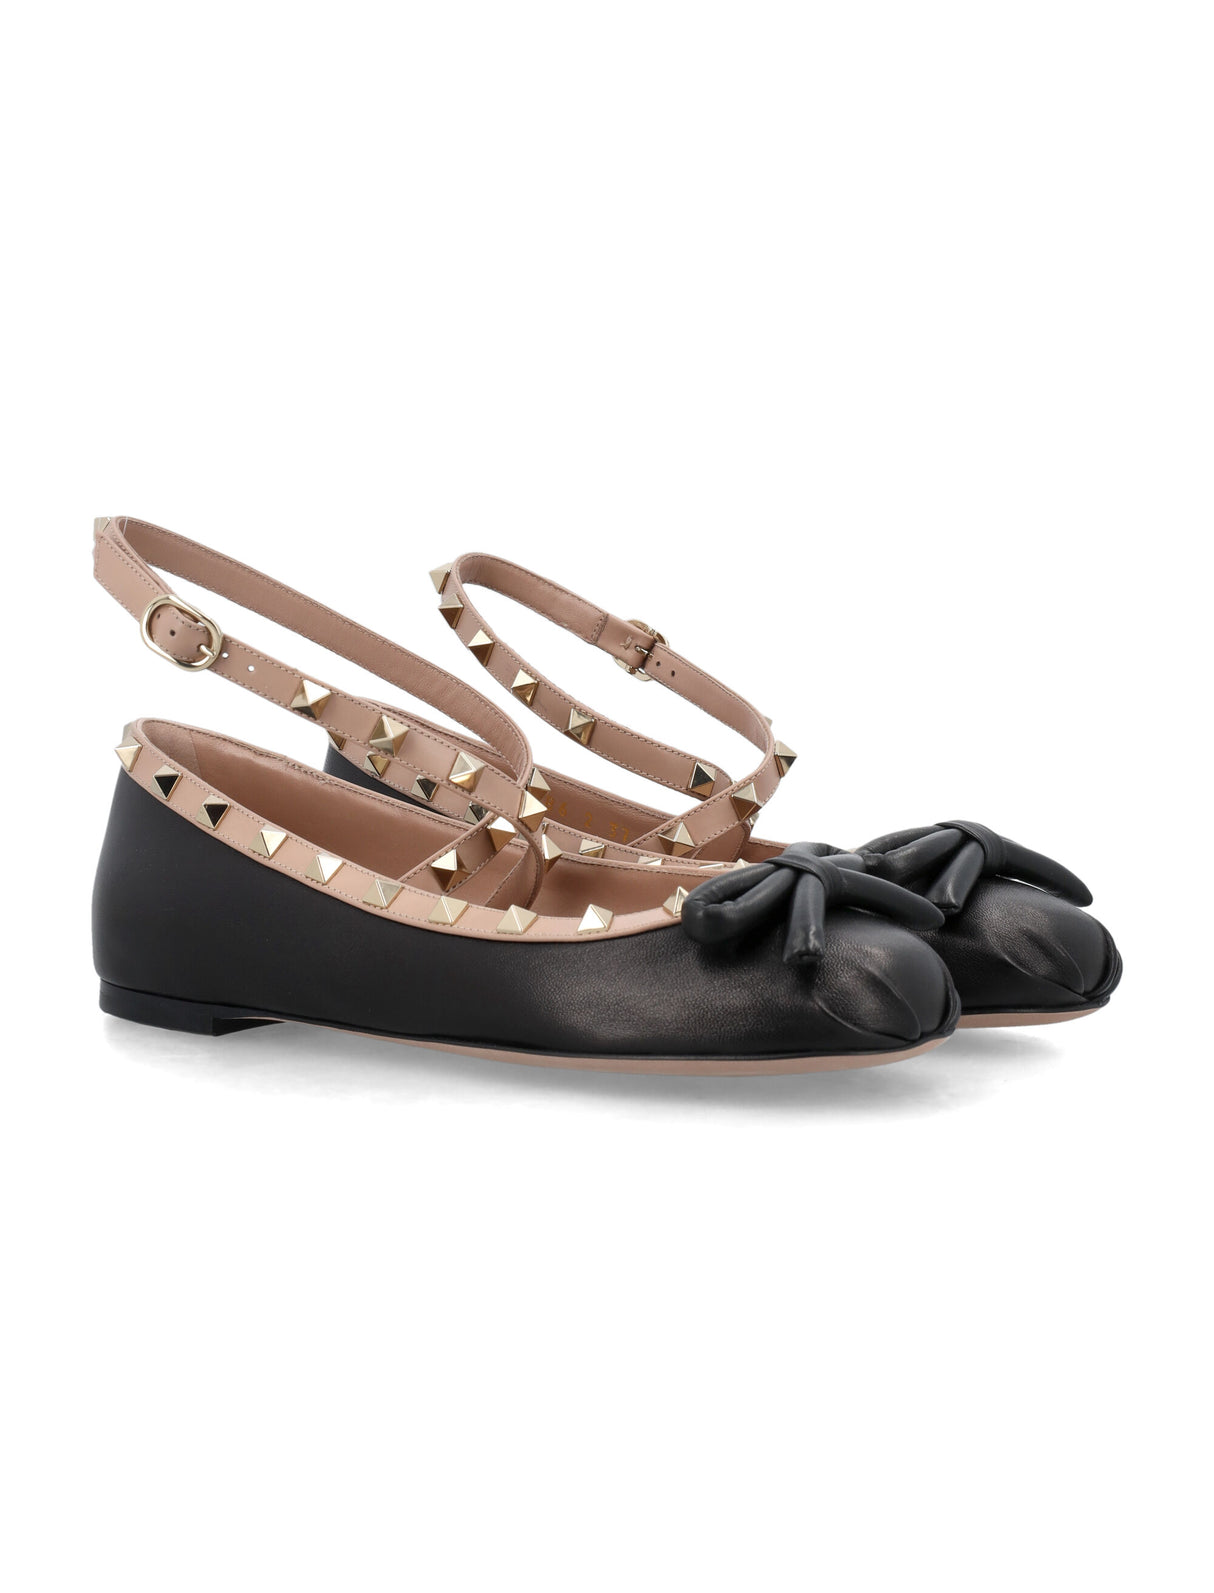 Women's Studded Leather Ballerina Flats with Bow Detail and Adjustable Strap